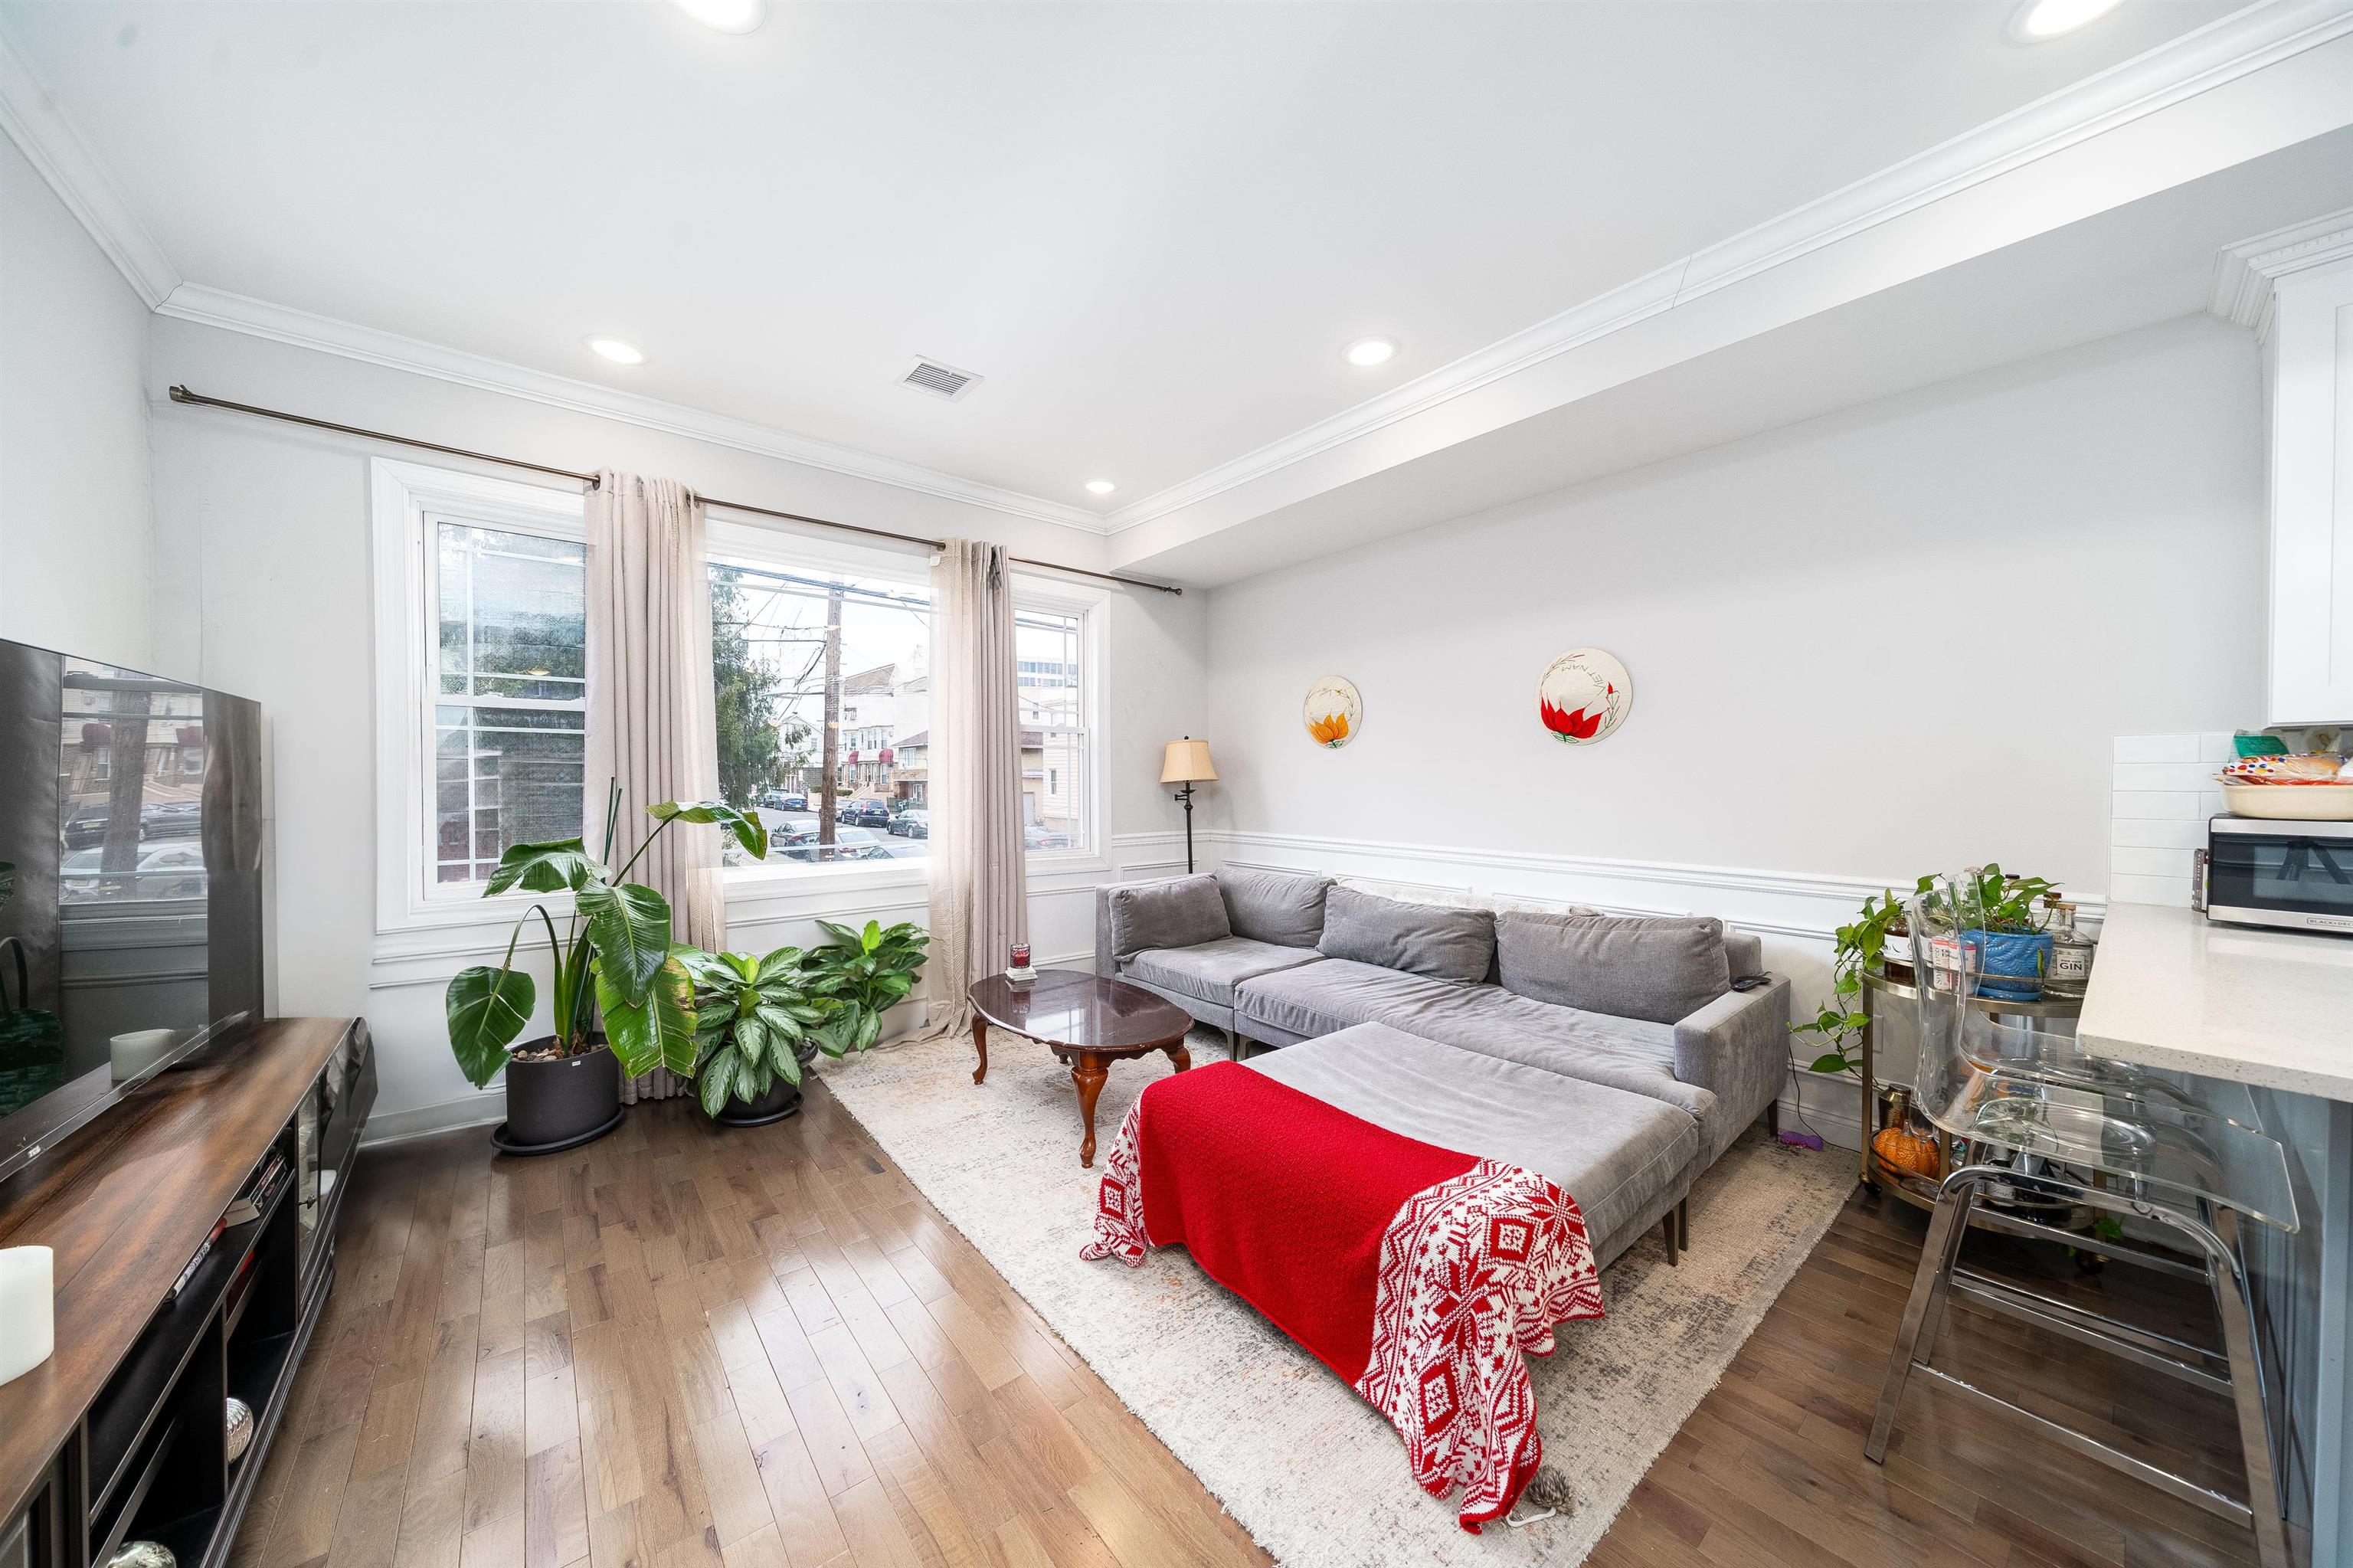 # 240005997 - For Rent in JERSEY CITY - Journal Square NJ